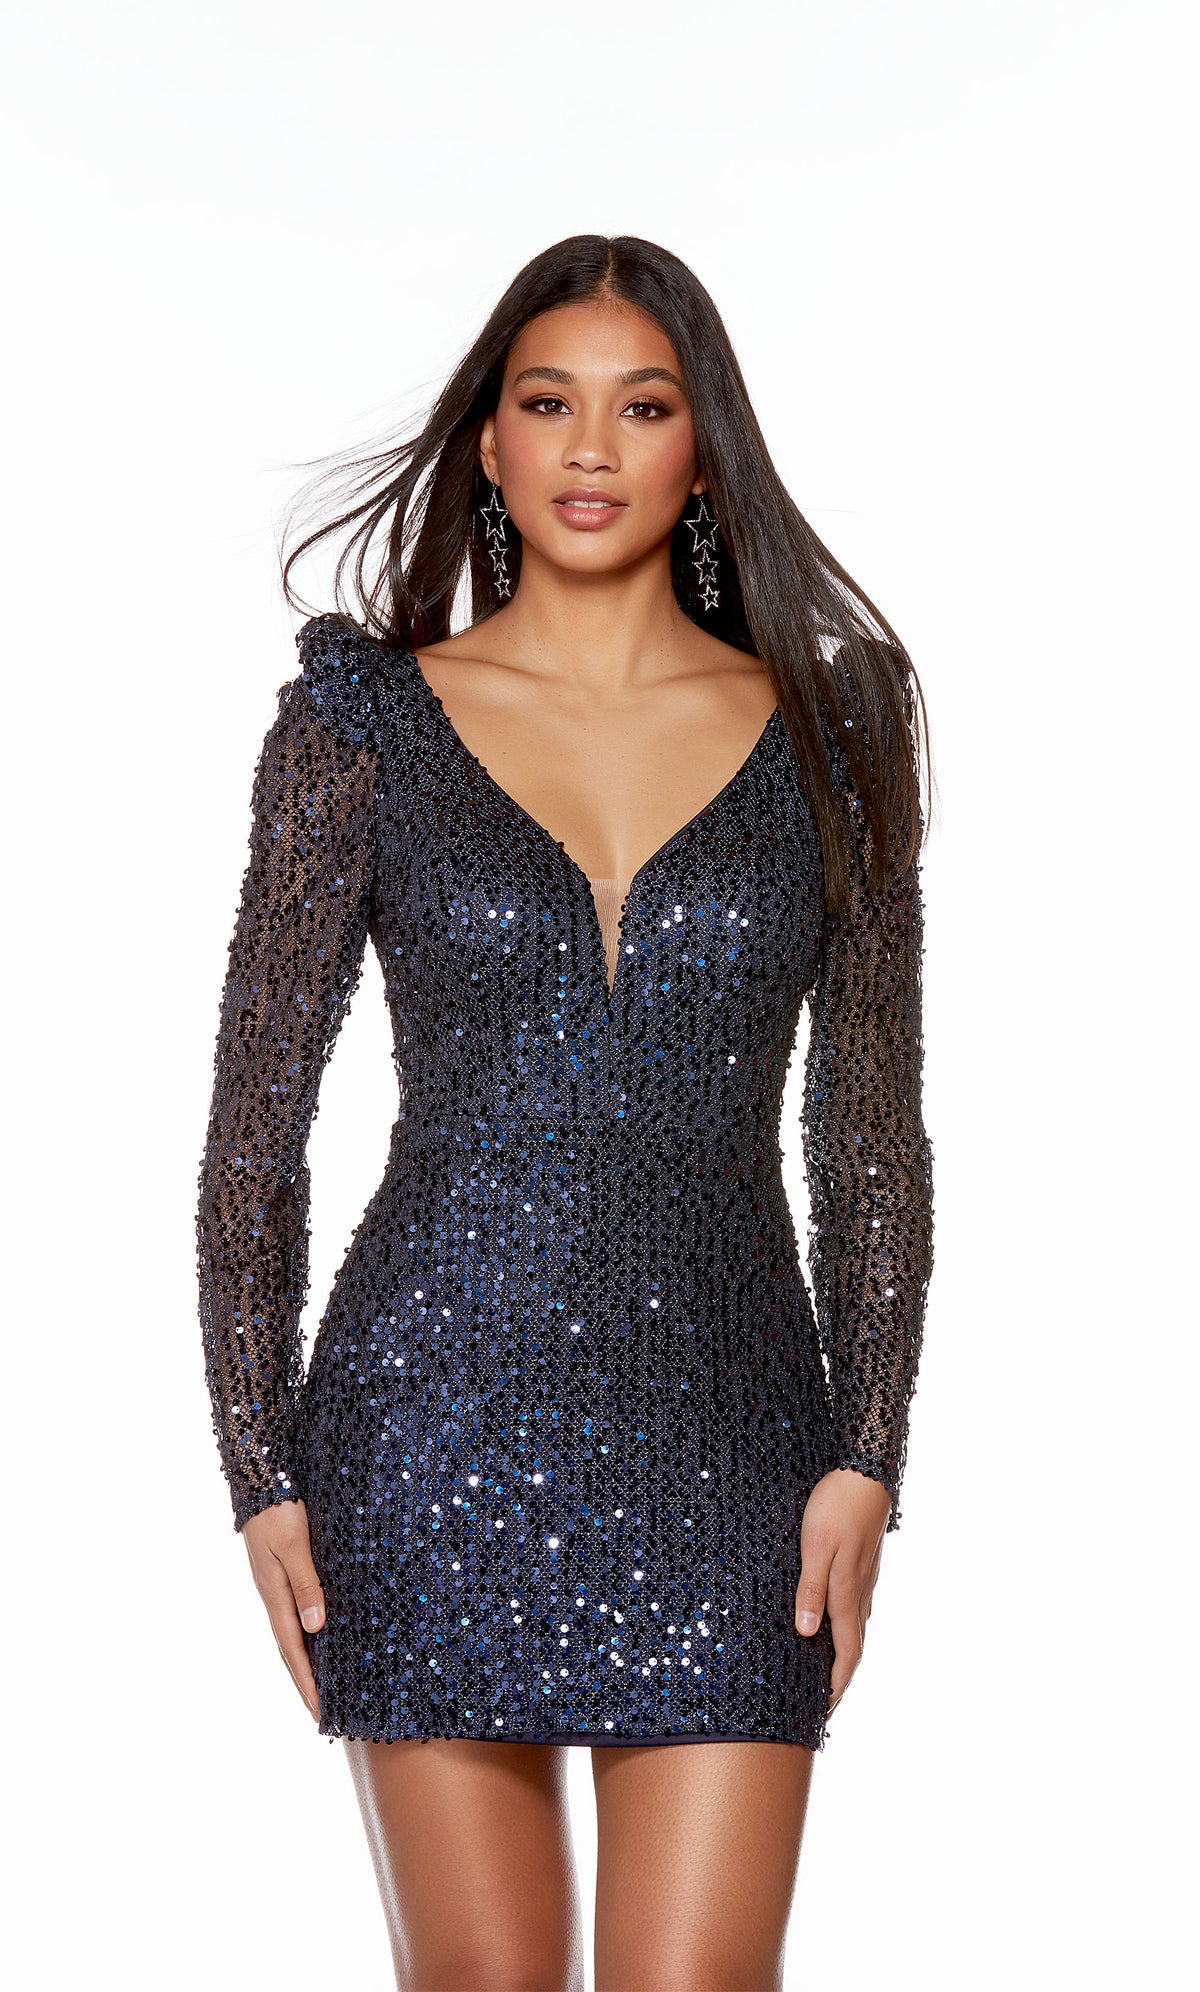 A short, midnight blue colored long-sleeve homecoming dress with a plunging neckline and a V-shaped open back in a sparkly micro sequin fabric, designed with a sleek, fitted silhouette.